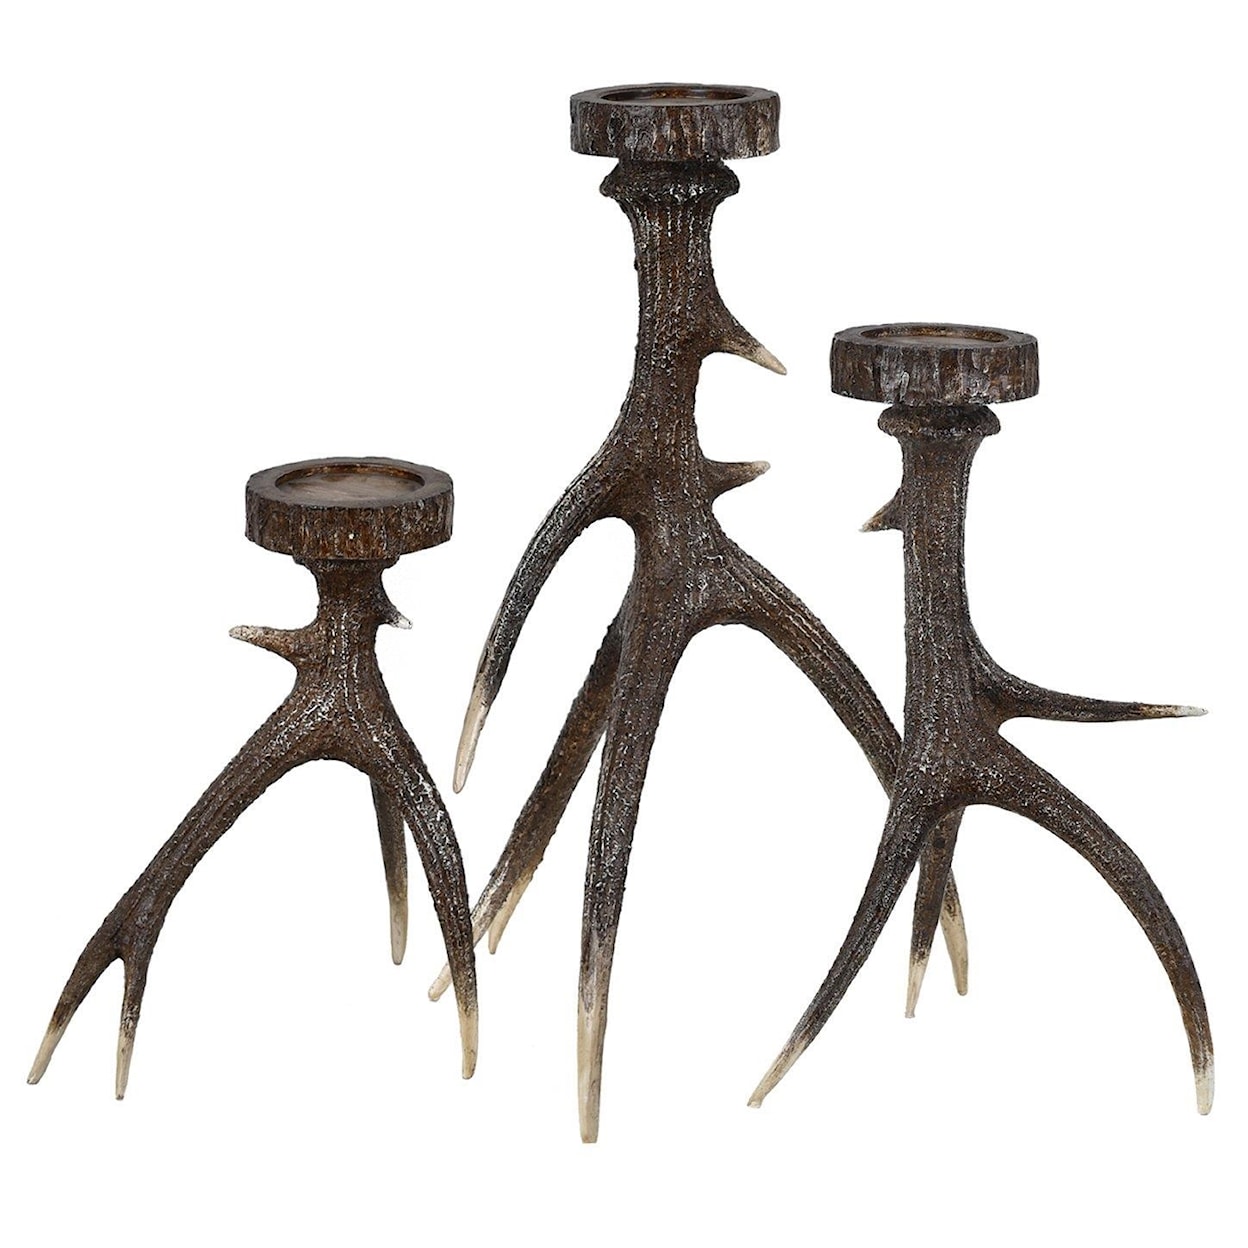 Crestview Collection Decorative Accessories Set of 3 Antler Candleholders